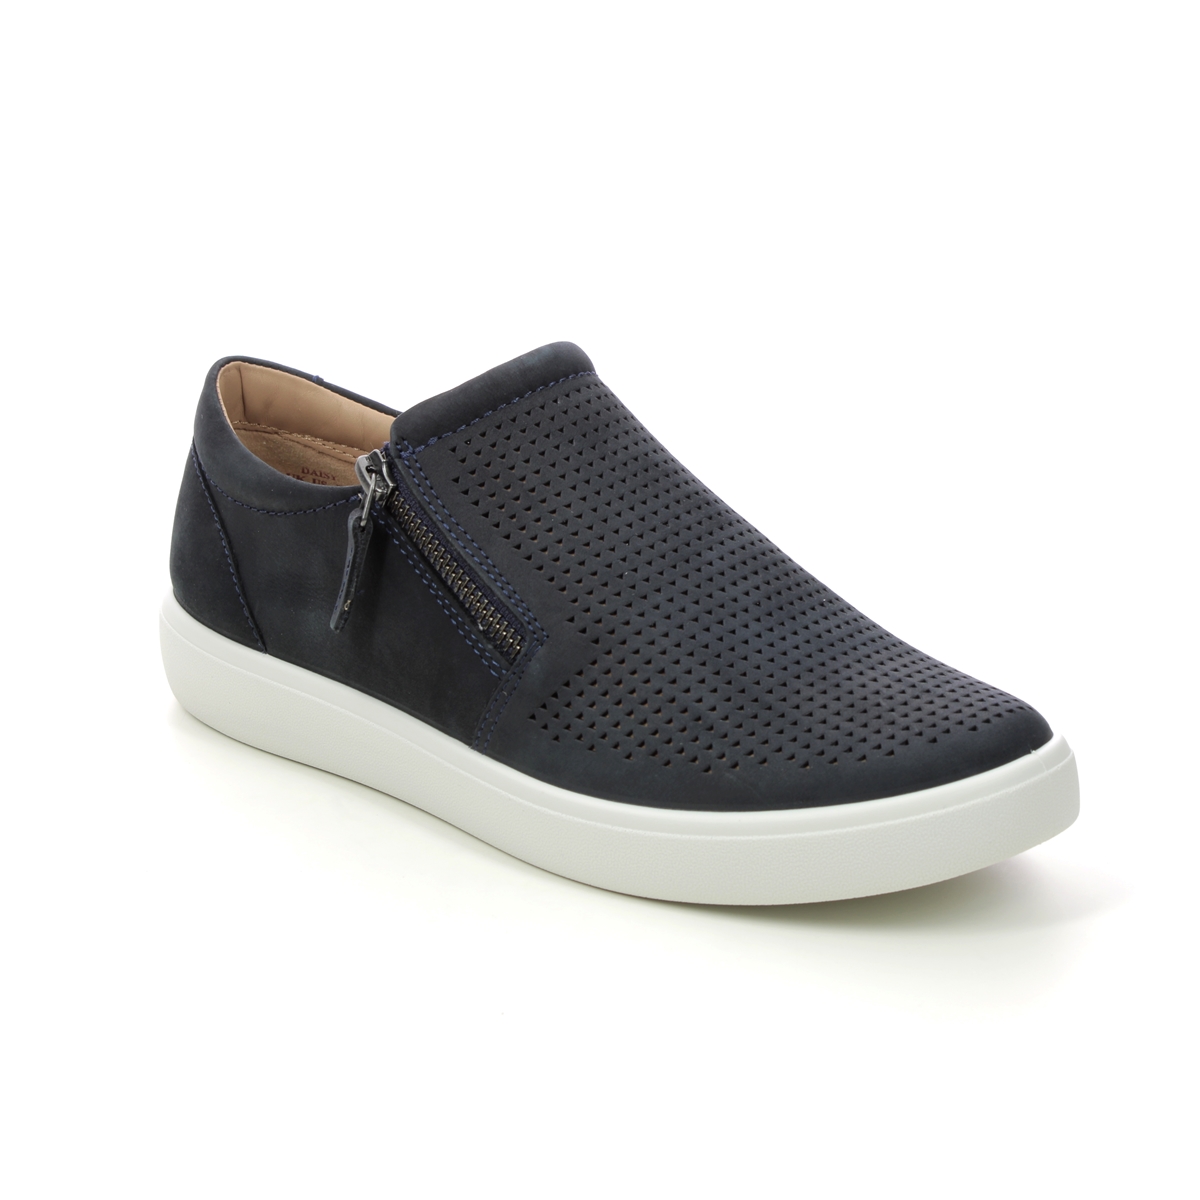 Hotter Daisy Wide Navy nubuck Womens Comfort Slip On Shoes 16215-73 in a Plain  in Size 7